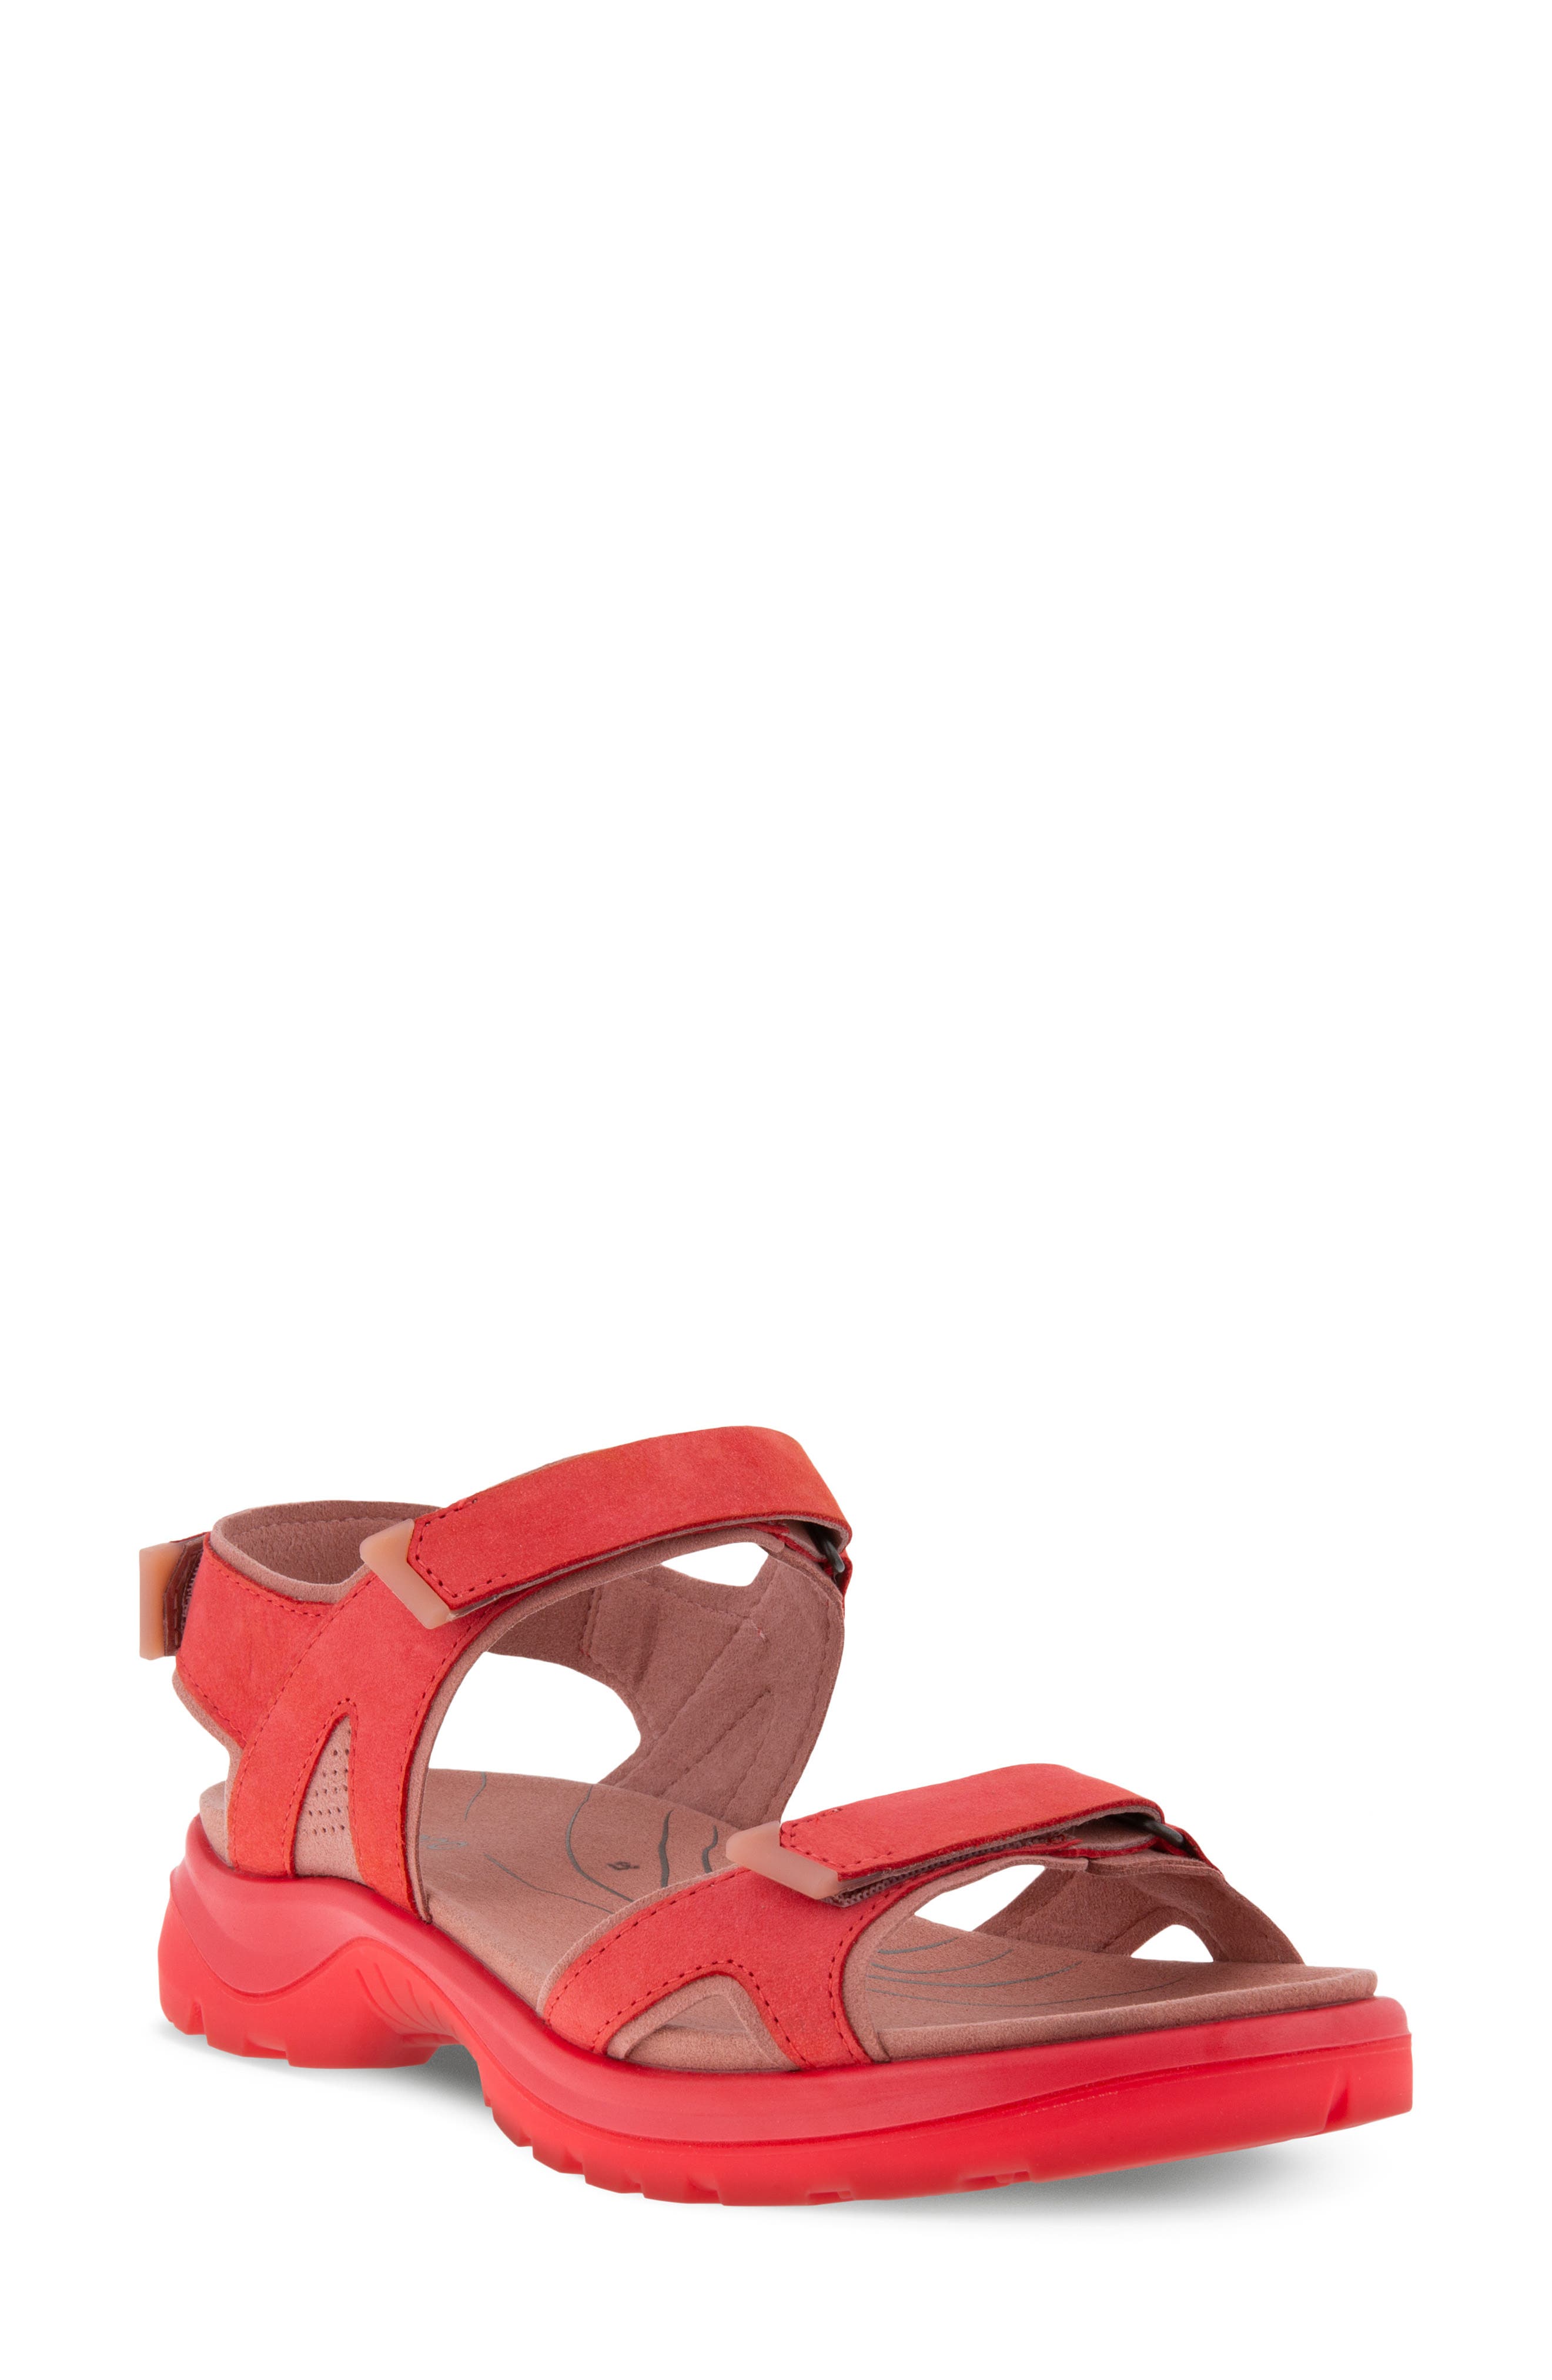 Ecco Sandals For Women Shop, 41% OFF | www.ilpungolo.org